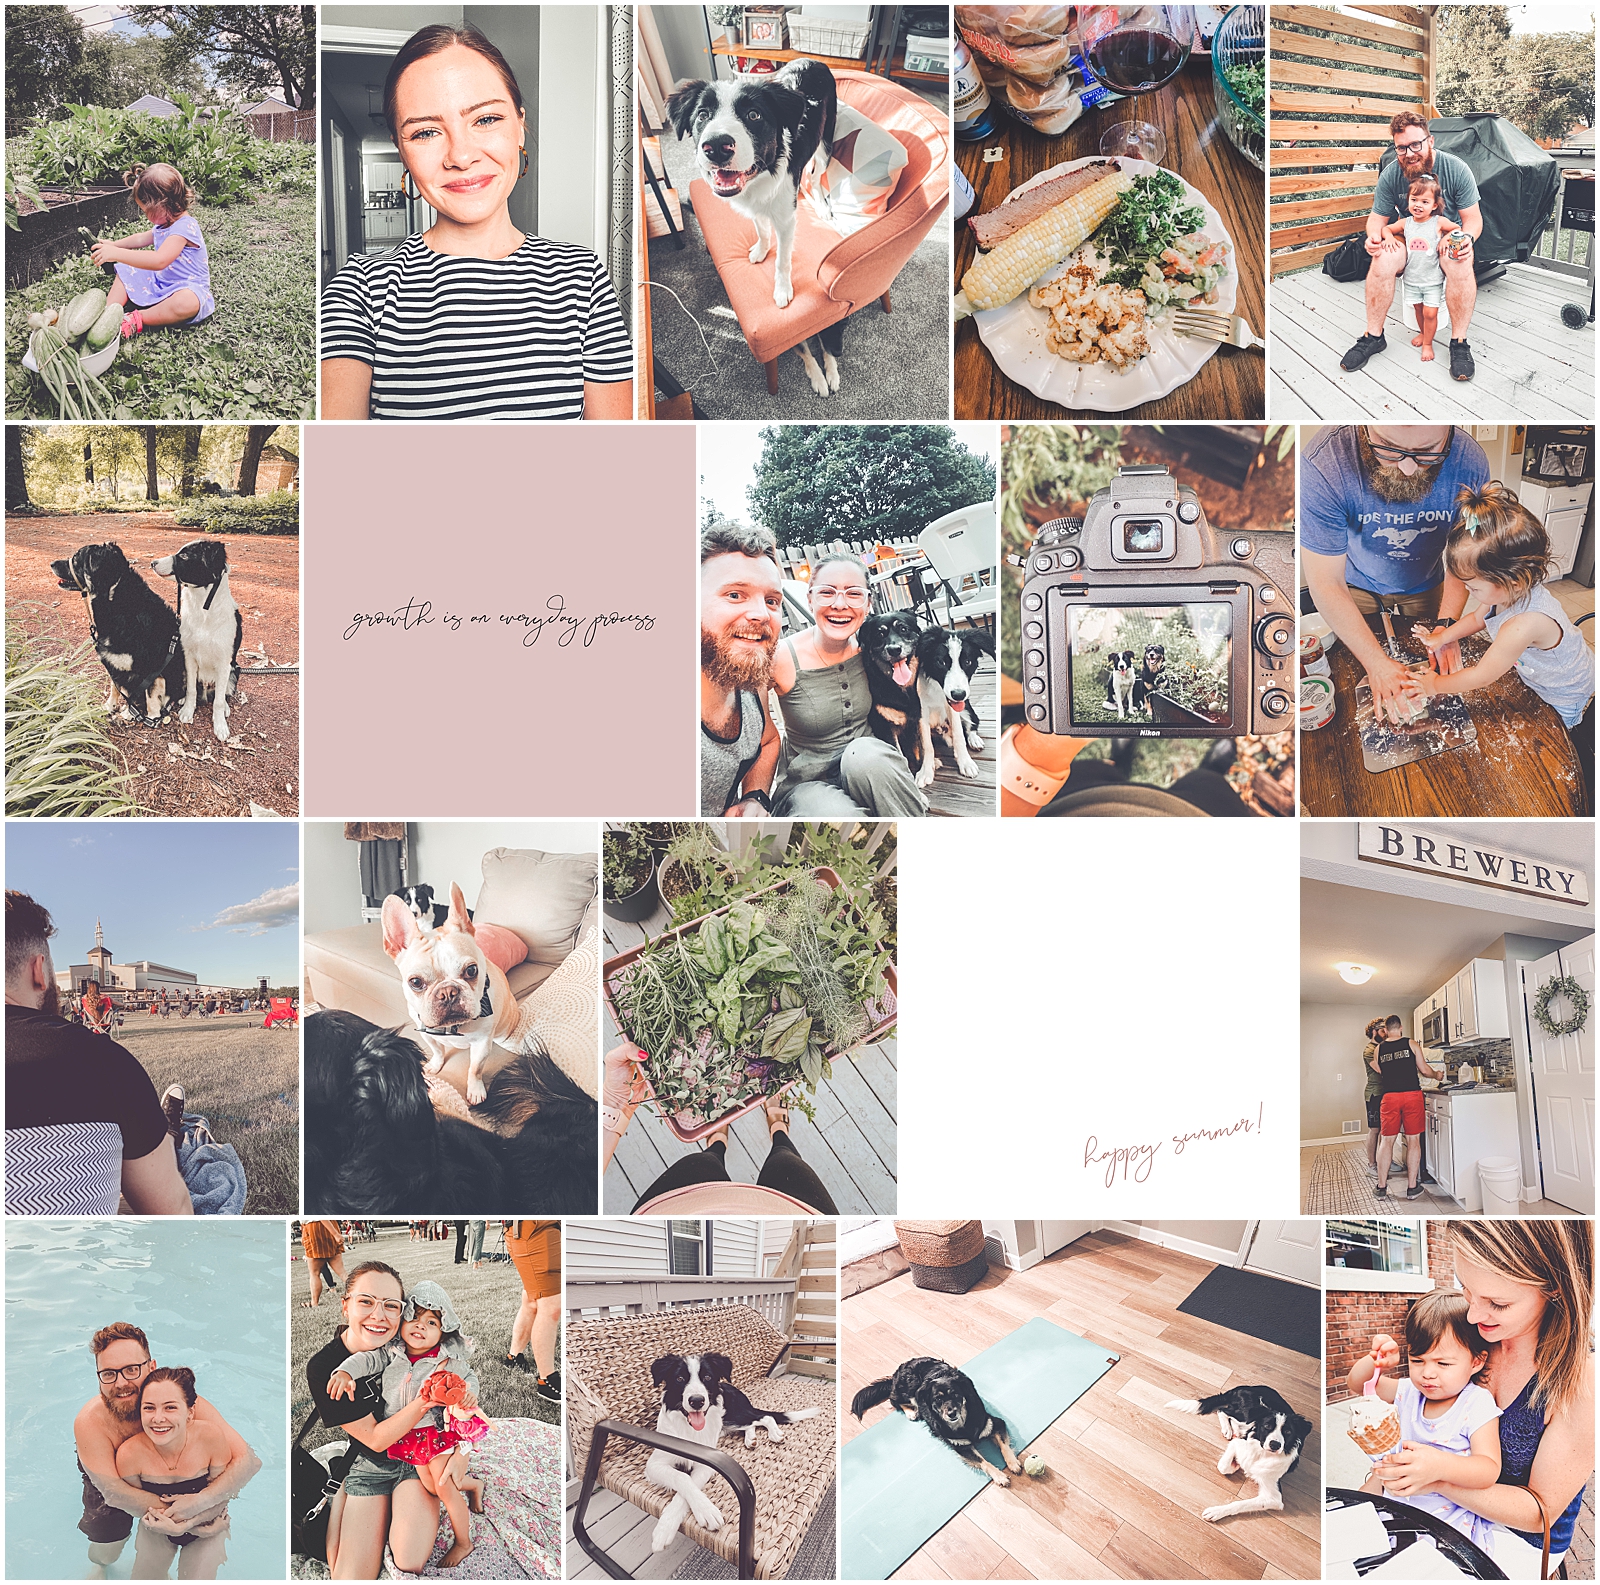 A look at the July 2020 My Life Mondays monthly blog recap with Chicagoland wedding photographer and business mentor Kara Evans Photographer.